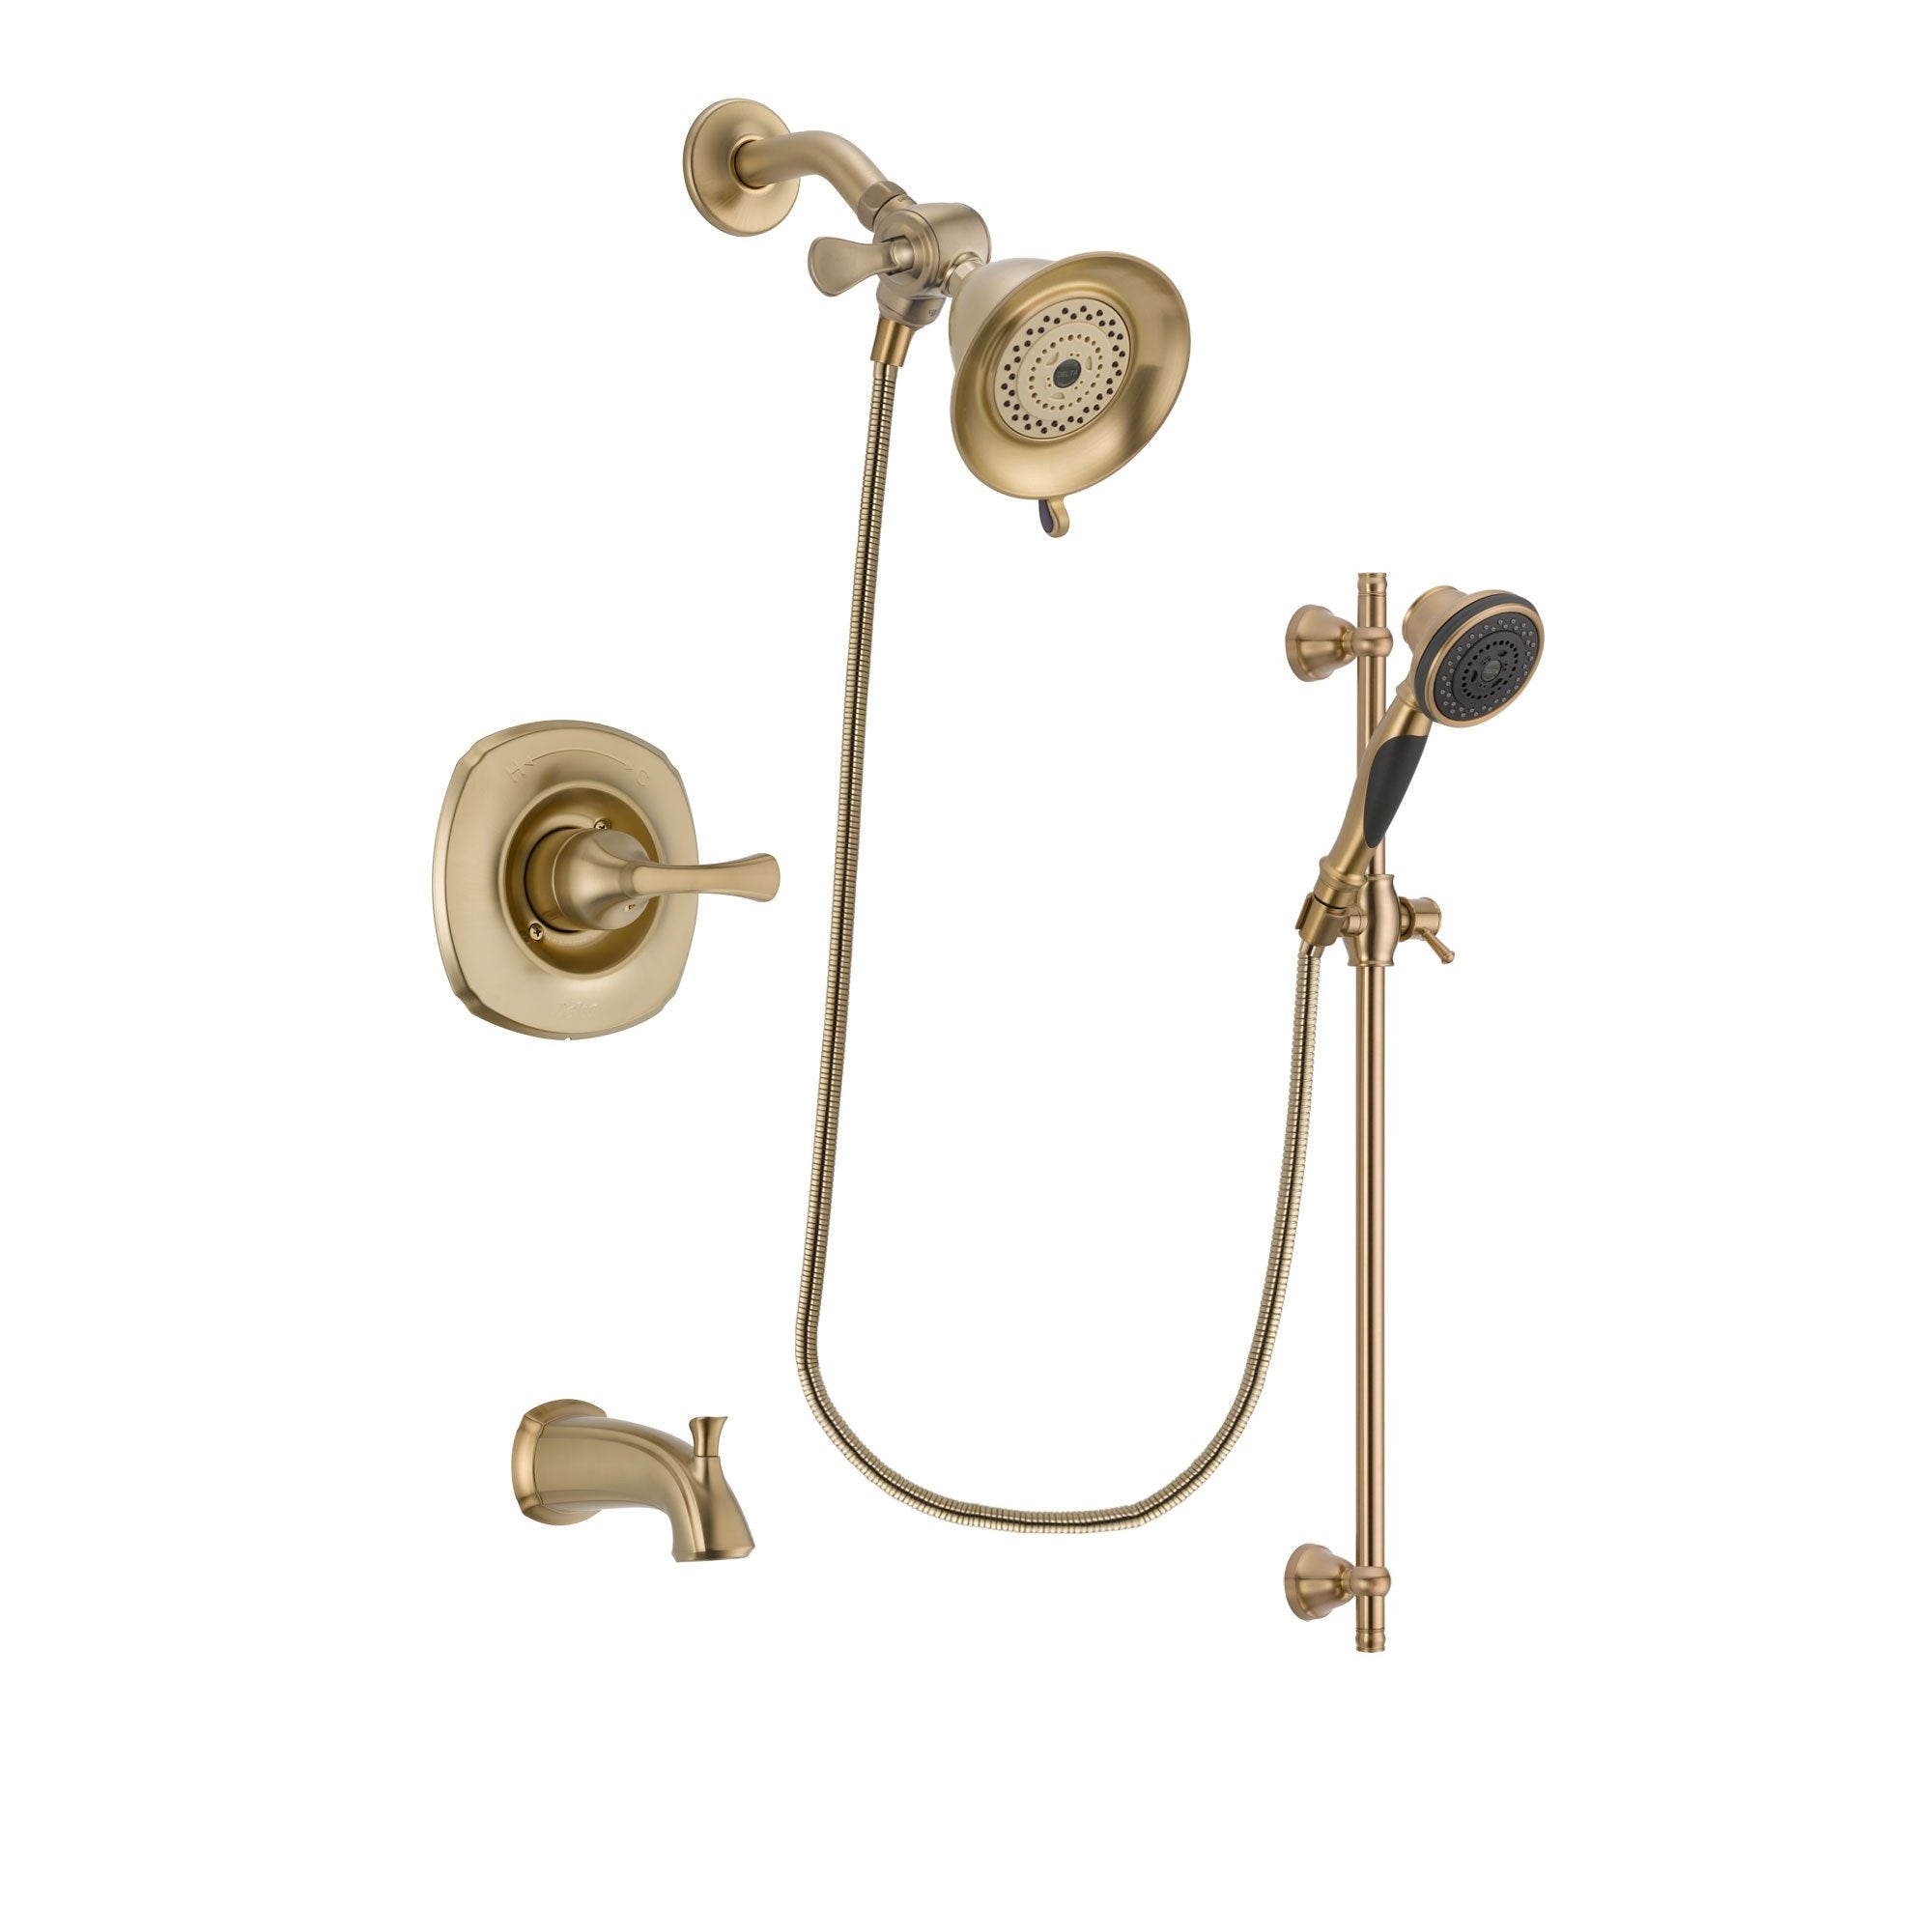 Delta Addison Champagne Bronze Finish Tub and Shower Faucet System Package with Water-Efficient Shower Head and Personal Handheld Shower Spray with Slide Bar Includes Rough-in Valve and Tub Spout DSP3537V